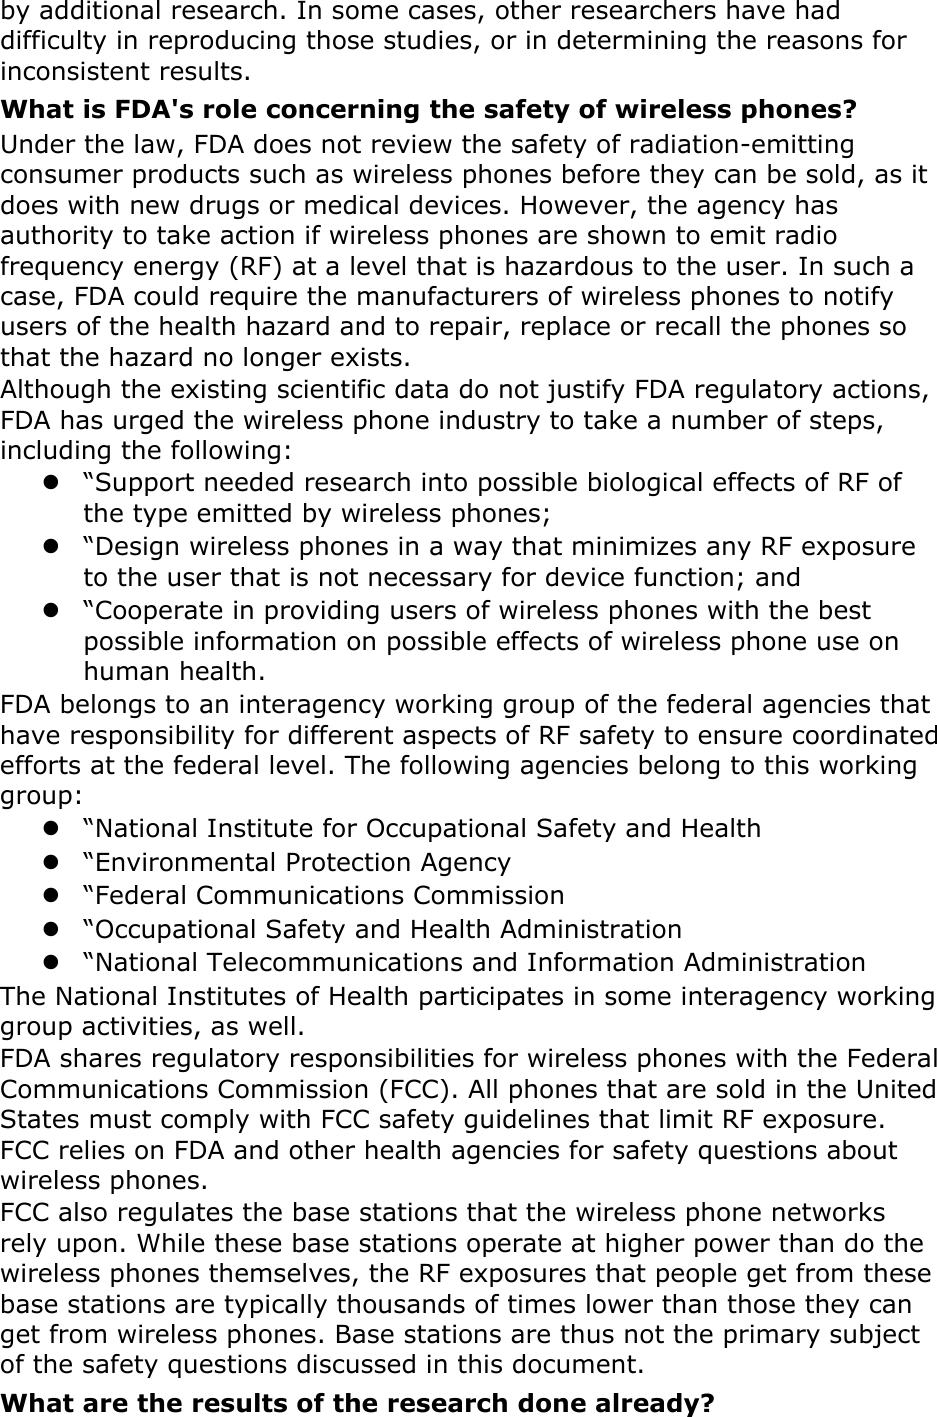 by additional research. In some cases, other researchers have had difficulty in reproducing those studies, or in determining the reasons for inconsistent results. What is FDA&apos;s role concerning the safety of wireless phones? Under the law, FDA does not review the safety of radiation-emitting consumer products such as wireless phones before they can be sold, as it does with new drugs or medical devices. However, the agency has authority to take action if wireless phones are shown to emit radio frequency energy (RF) at a level that is hazardous to the user. In such a case, FDA could require the manufacturers of wireless phones to notify users of the health hazard and to repair, replace or recall the phones so that the hazard no longer exists. Although the existing scientific data do not justify FDA regulatory actions, FDA has urged the wireless phone industry to take a number of steps, including the following:  “Support needed research into possible biological effects of RF of the type emitted by wireless phones;  “Design wireless phones in a way that minimizes any RF exposure to the user that is not necessary for device function; and  “Cooperate in providing users of wireless phones with the best possible information on possible effects of wireless phone use on human health. FDA belongs to an interagency working group of the federal agencies that have responsibility for different aspects of RF safety to ensure coordinated efforts at the federal level. The following agencies belong to this working group:  “National Institute for Occupational Safety and Health  “Environmental Protection Agency  “Federal Communications Commission  “Occupational Safety and Health Administration  “National Telecommunications and Information Administration The National Institutes of Health participates in some interagency working group activities, as well. FDA shares regulatory responsibilities for wireless phones with the Federal Communications Commission (FCC). All phones that are sold in the United States must comply with FCC safety guidelines that limit RF exposure. FCC relies on FDA and other health agencies for safety questions about wireless phones. FCC also regulates the base stations that the wireless phone networks rely upon. While these base stations operate at higher power than do the wireless phones themselves, the RF exposures that people get from these base stations are typically thousands of times lower than those they can get from wireless phones. Base stations are thus not the primary subject of the safety questions discussed in this document. What are the results of the research done already? 